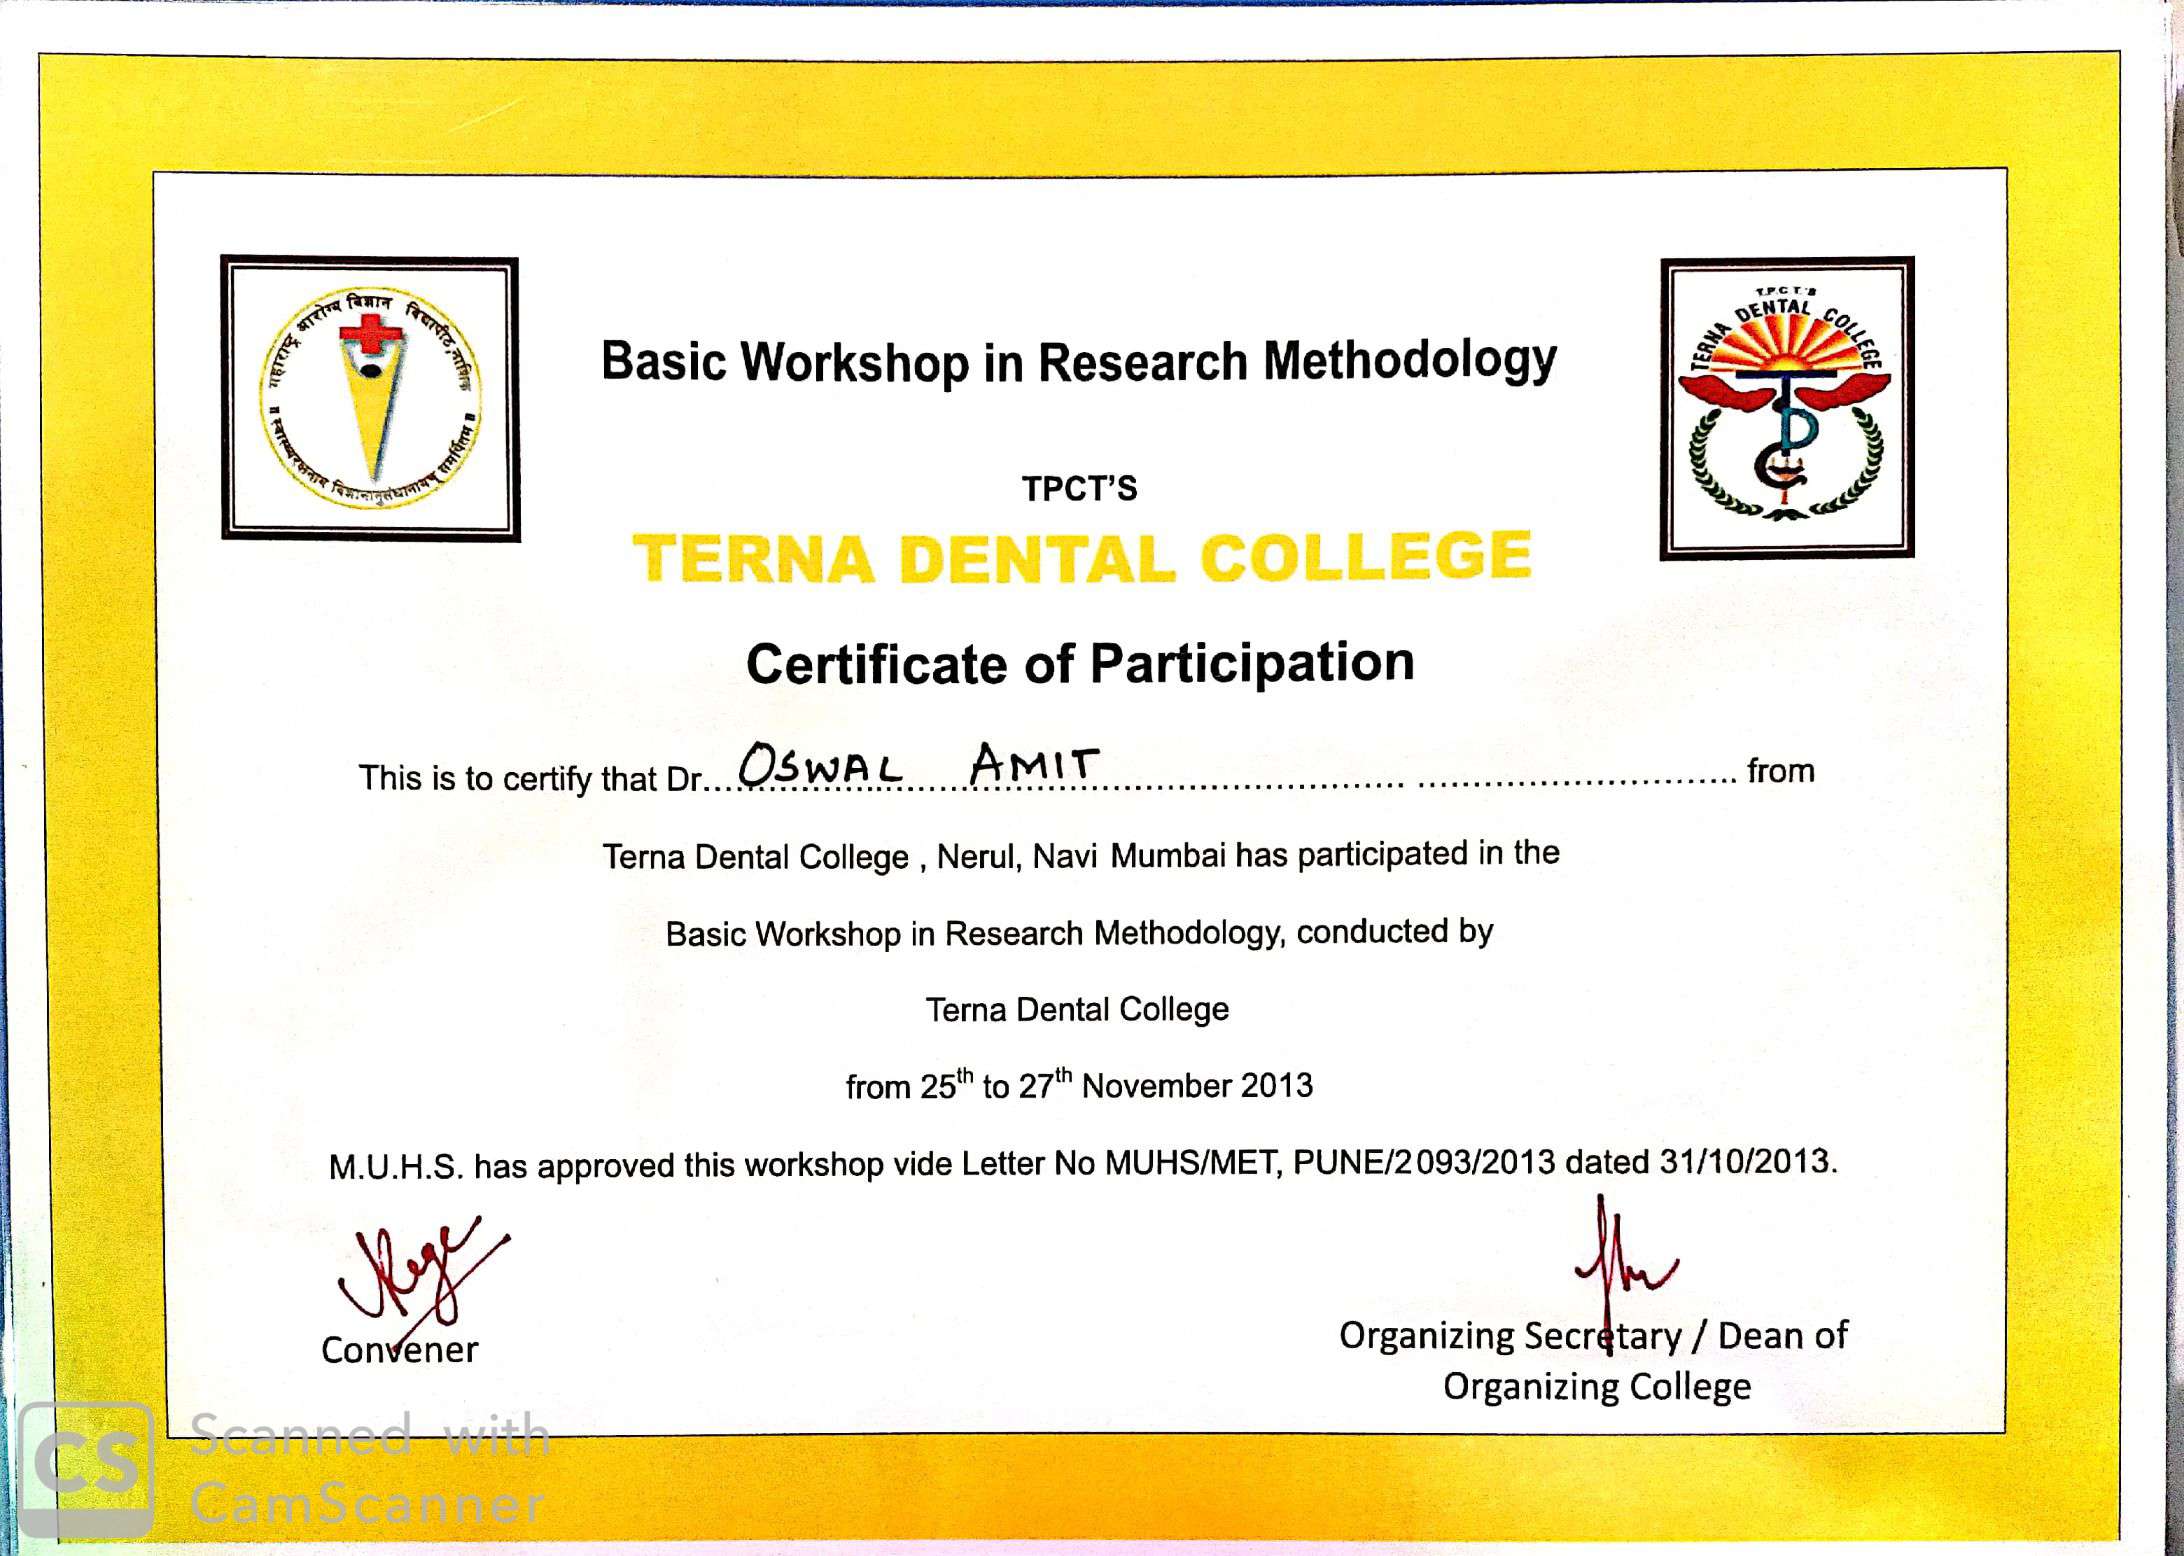 Research methodology workshop attended by the cosmetic dentist in mumbai